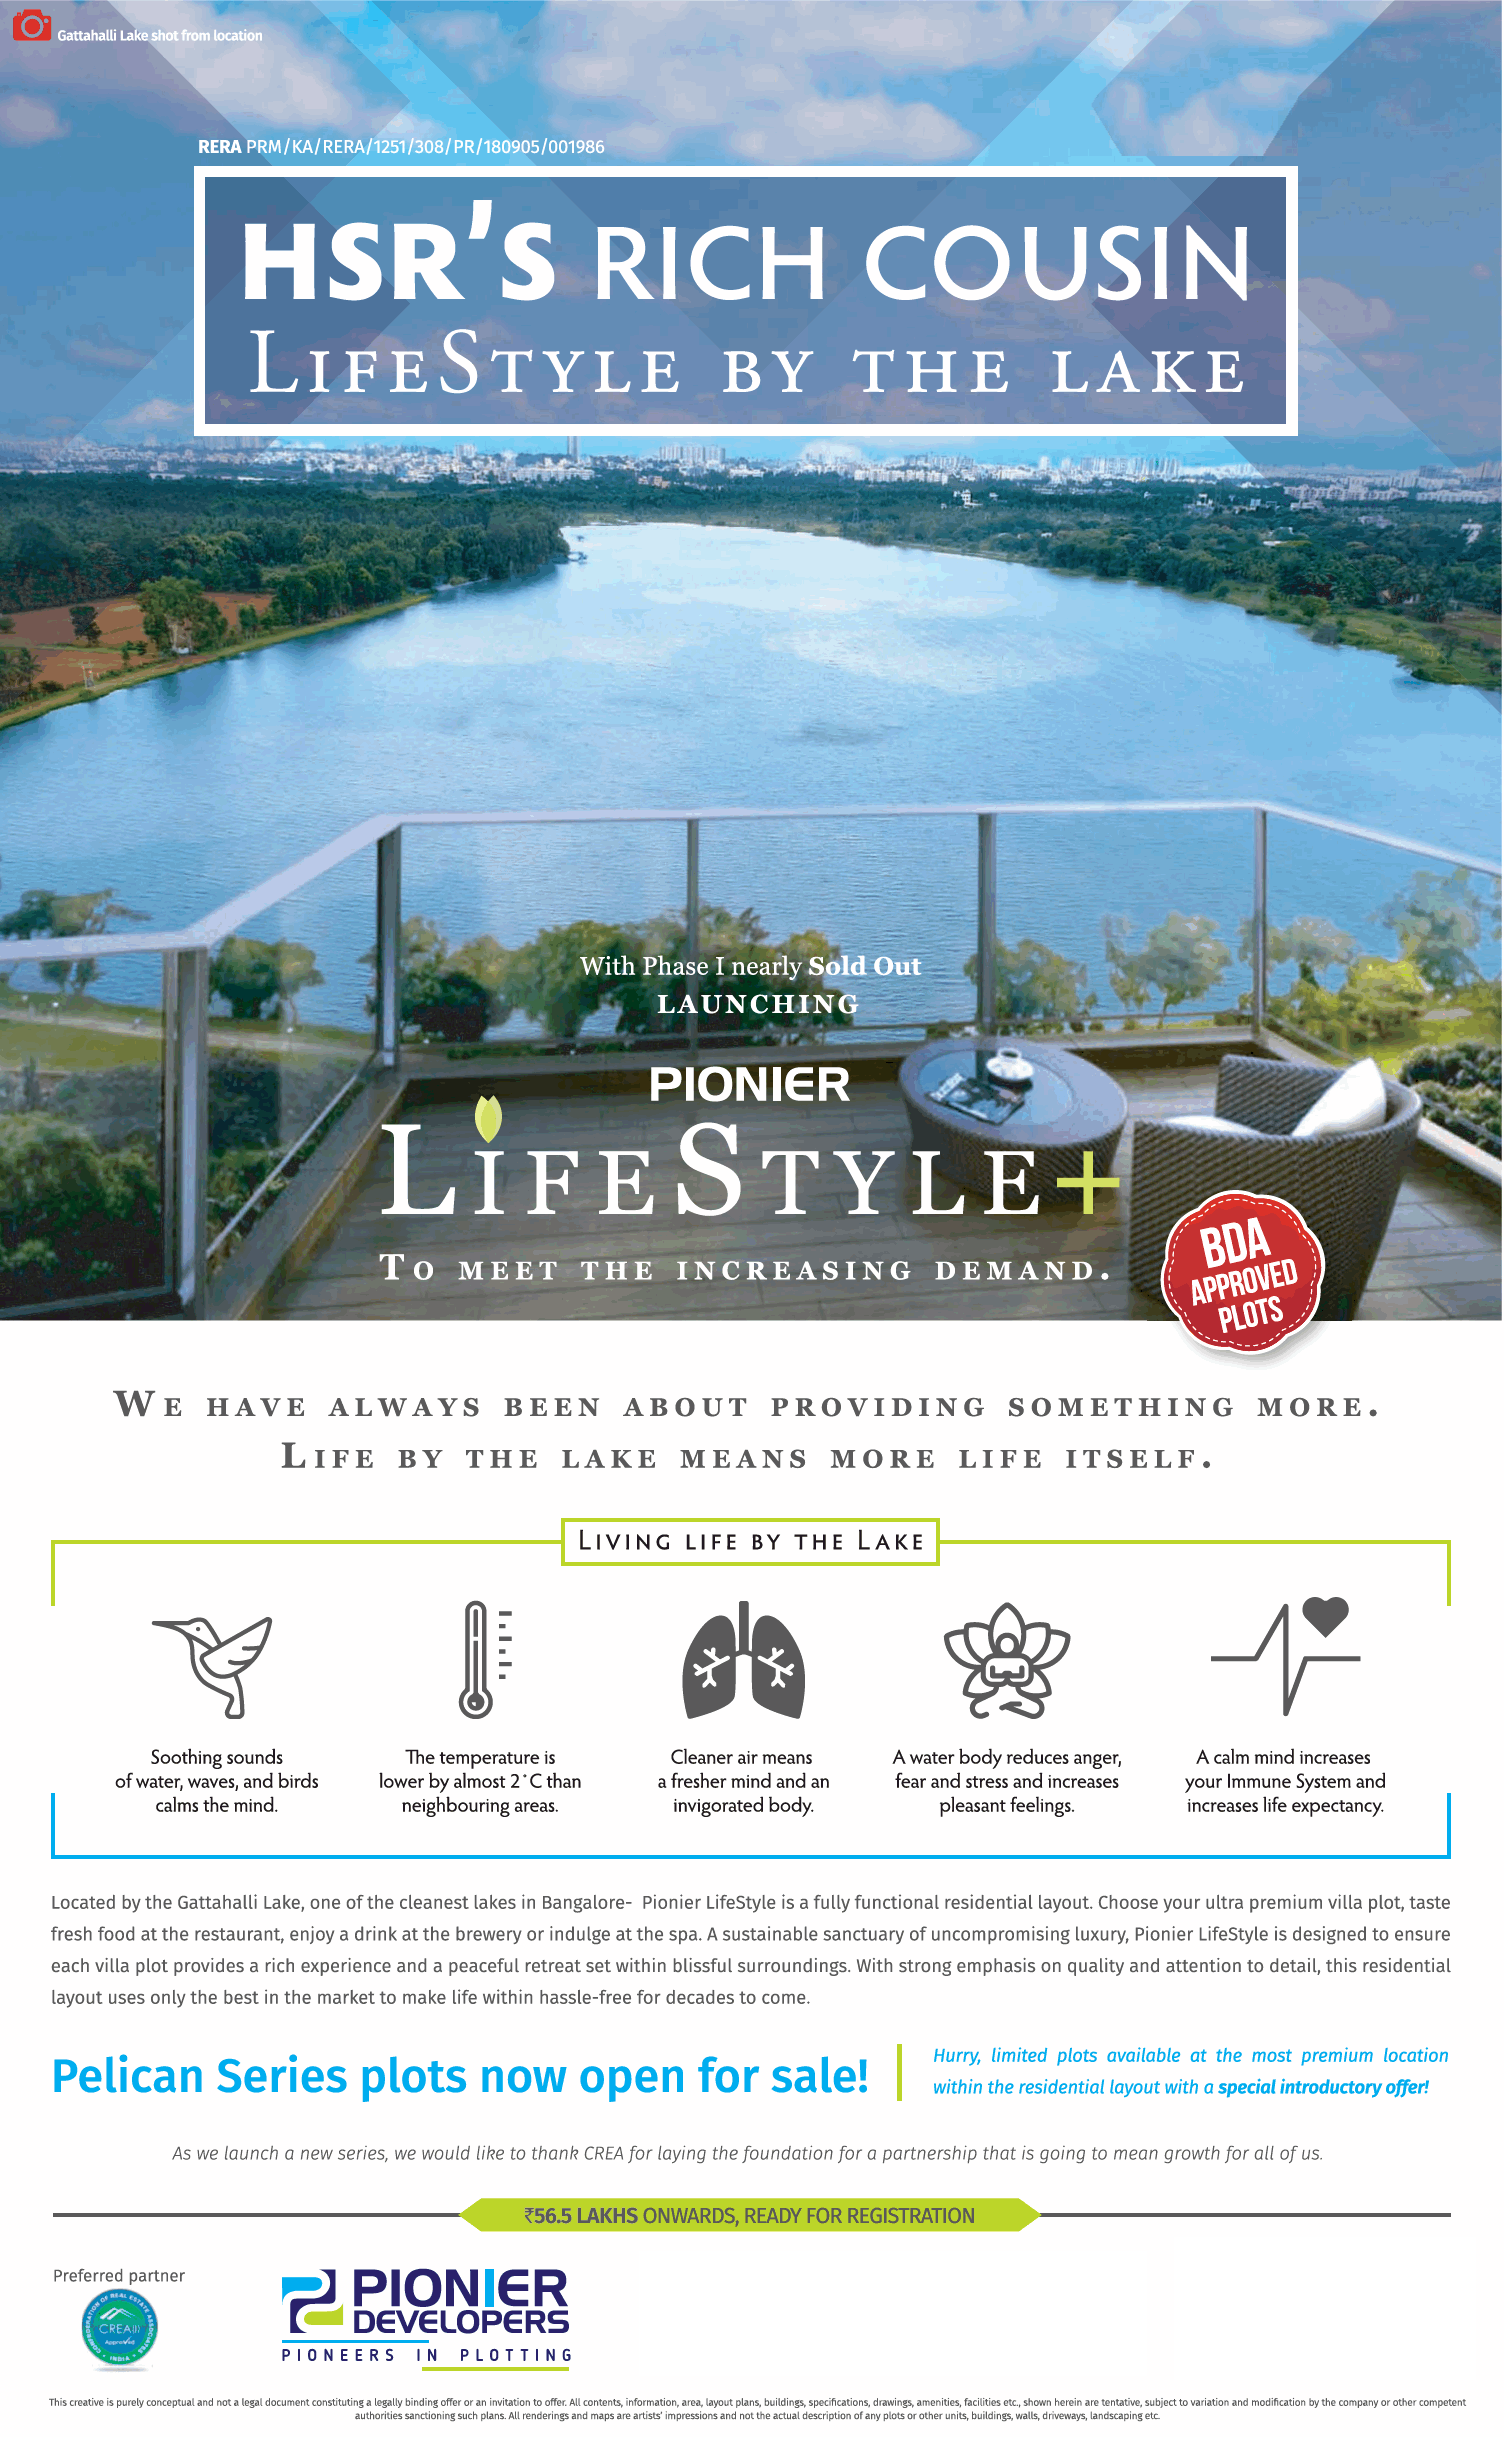 Pionier launching pelicon series plots at Lifestyle in Bangalore Update